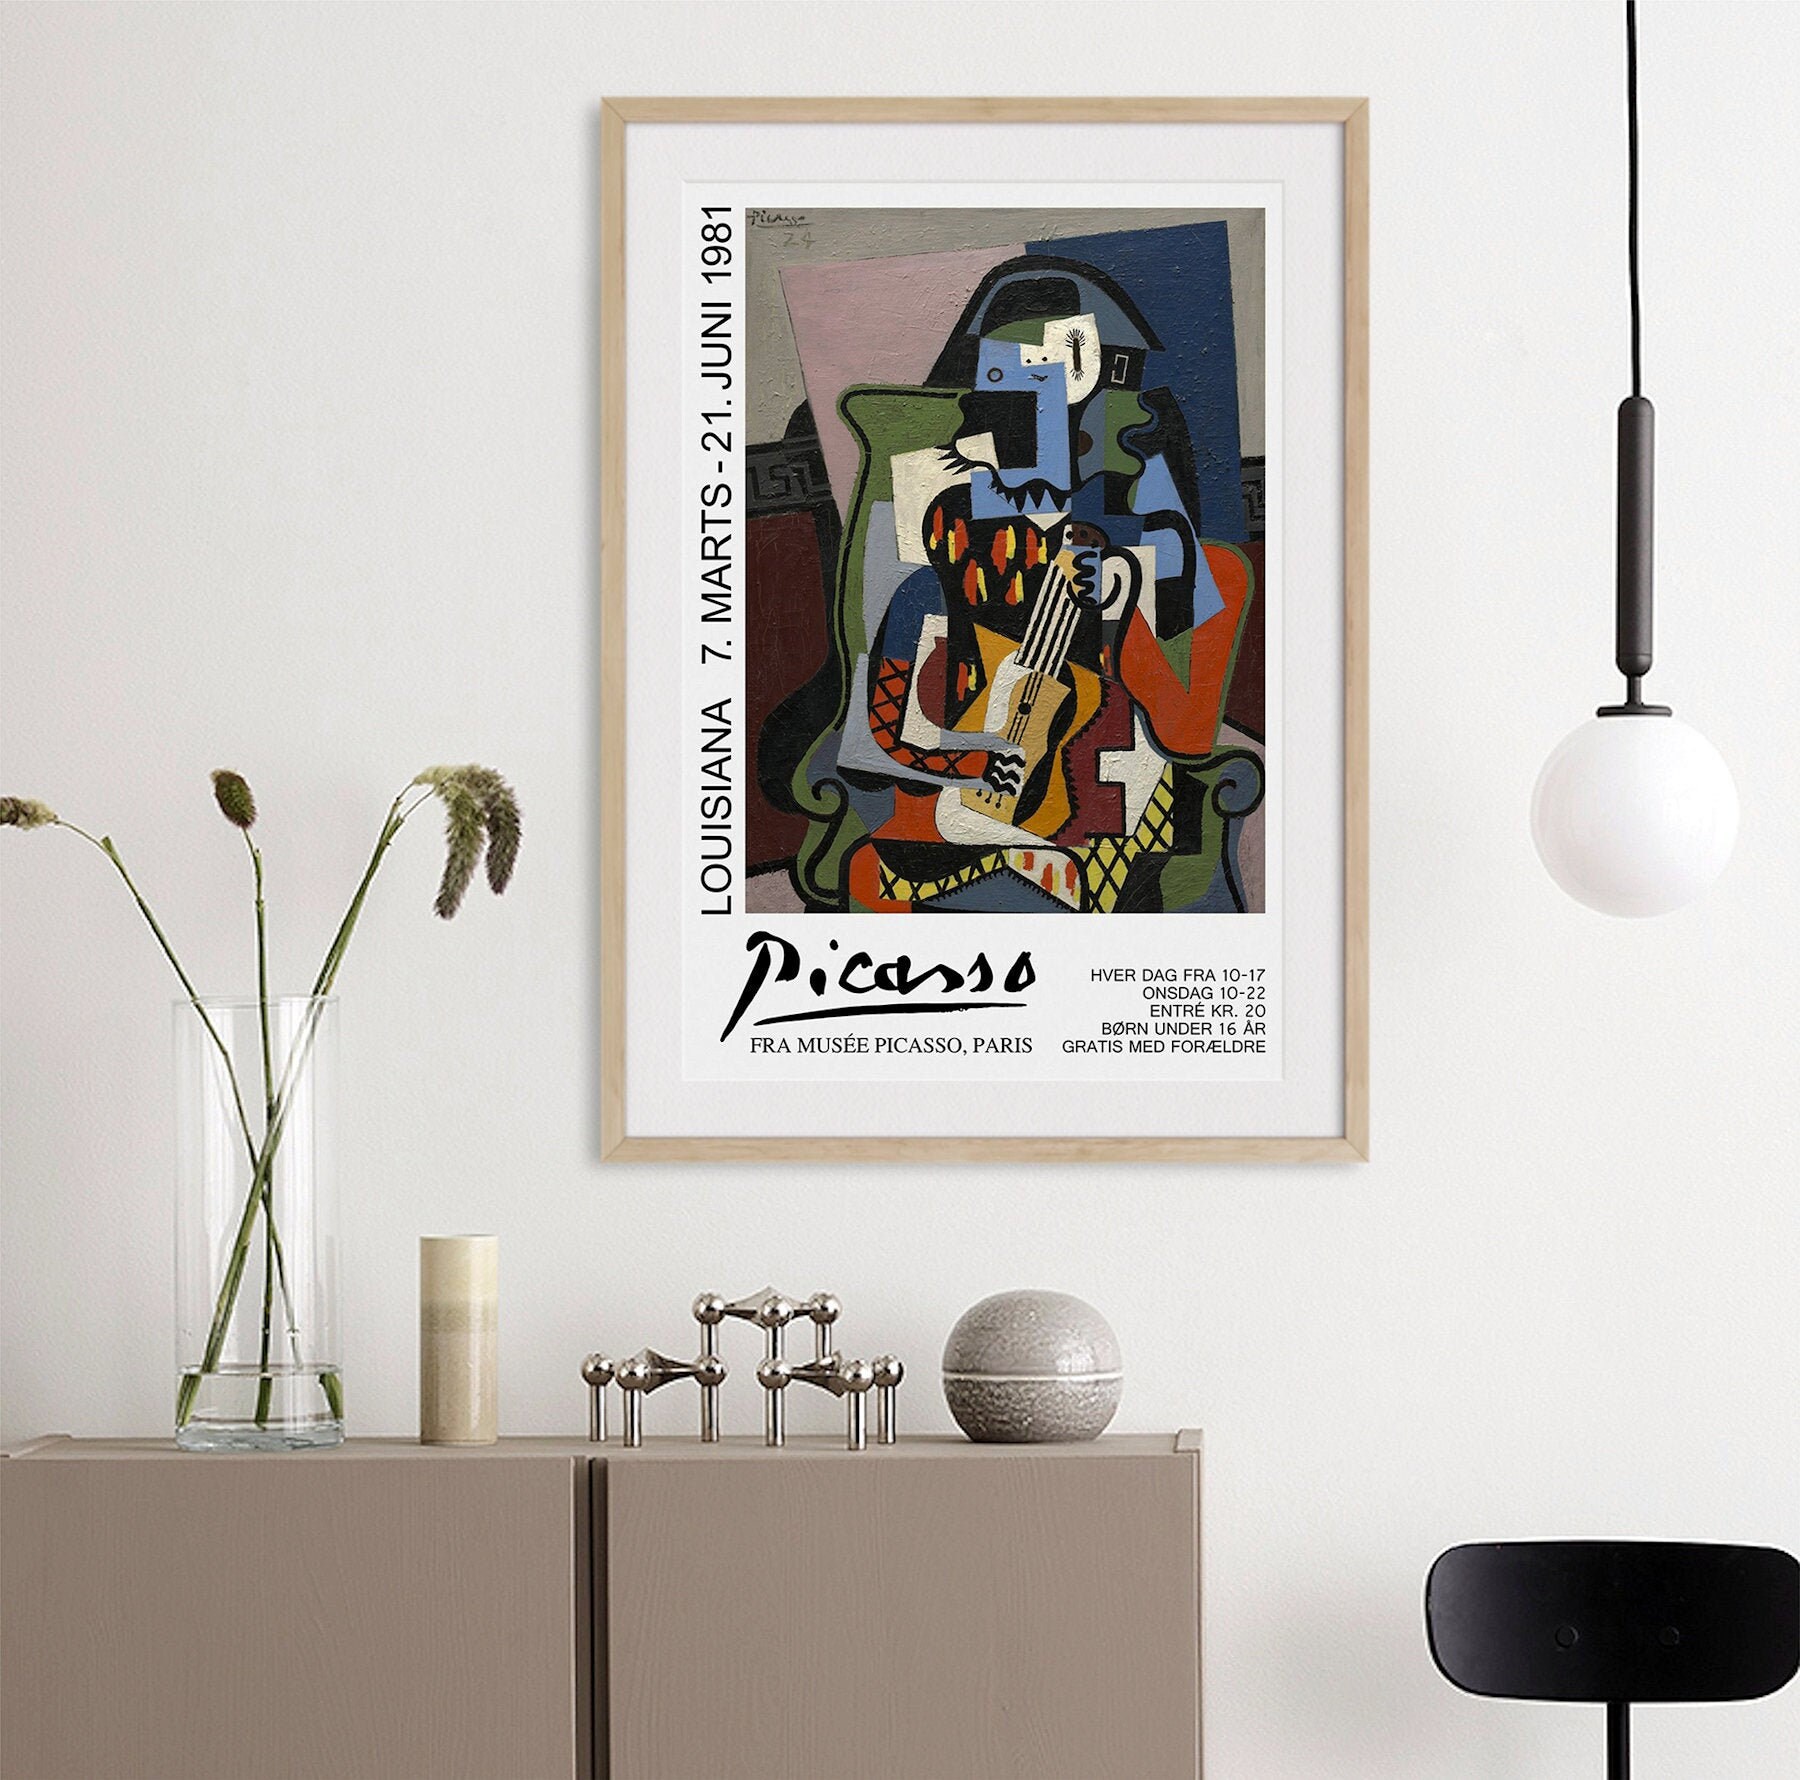 forkorte Aggressiv Pasture Pablo Picasso Art Exhibition Poster Abstract Art Cubism - Etsy